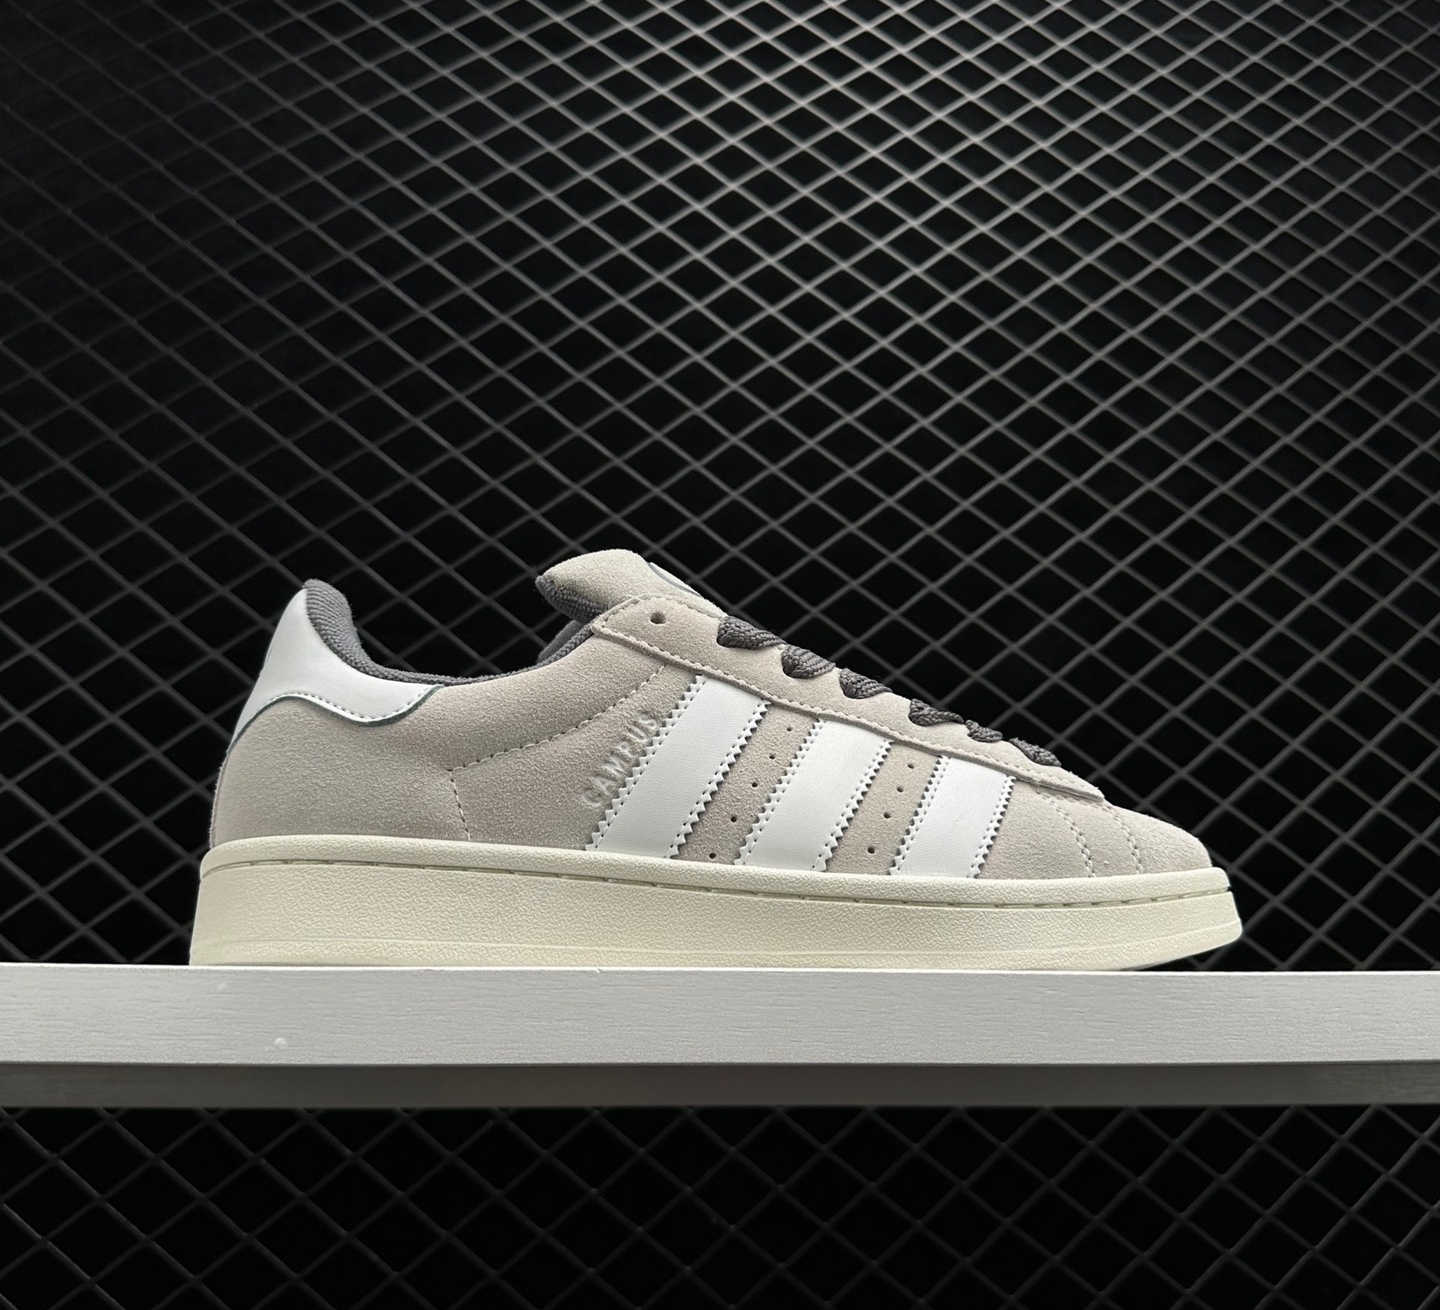 Adidas Campus 00s 'Grey' GY9472 - Classic Retro Sneakers for Style Seekers